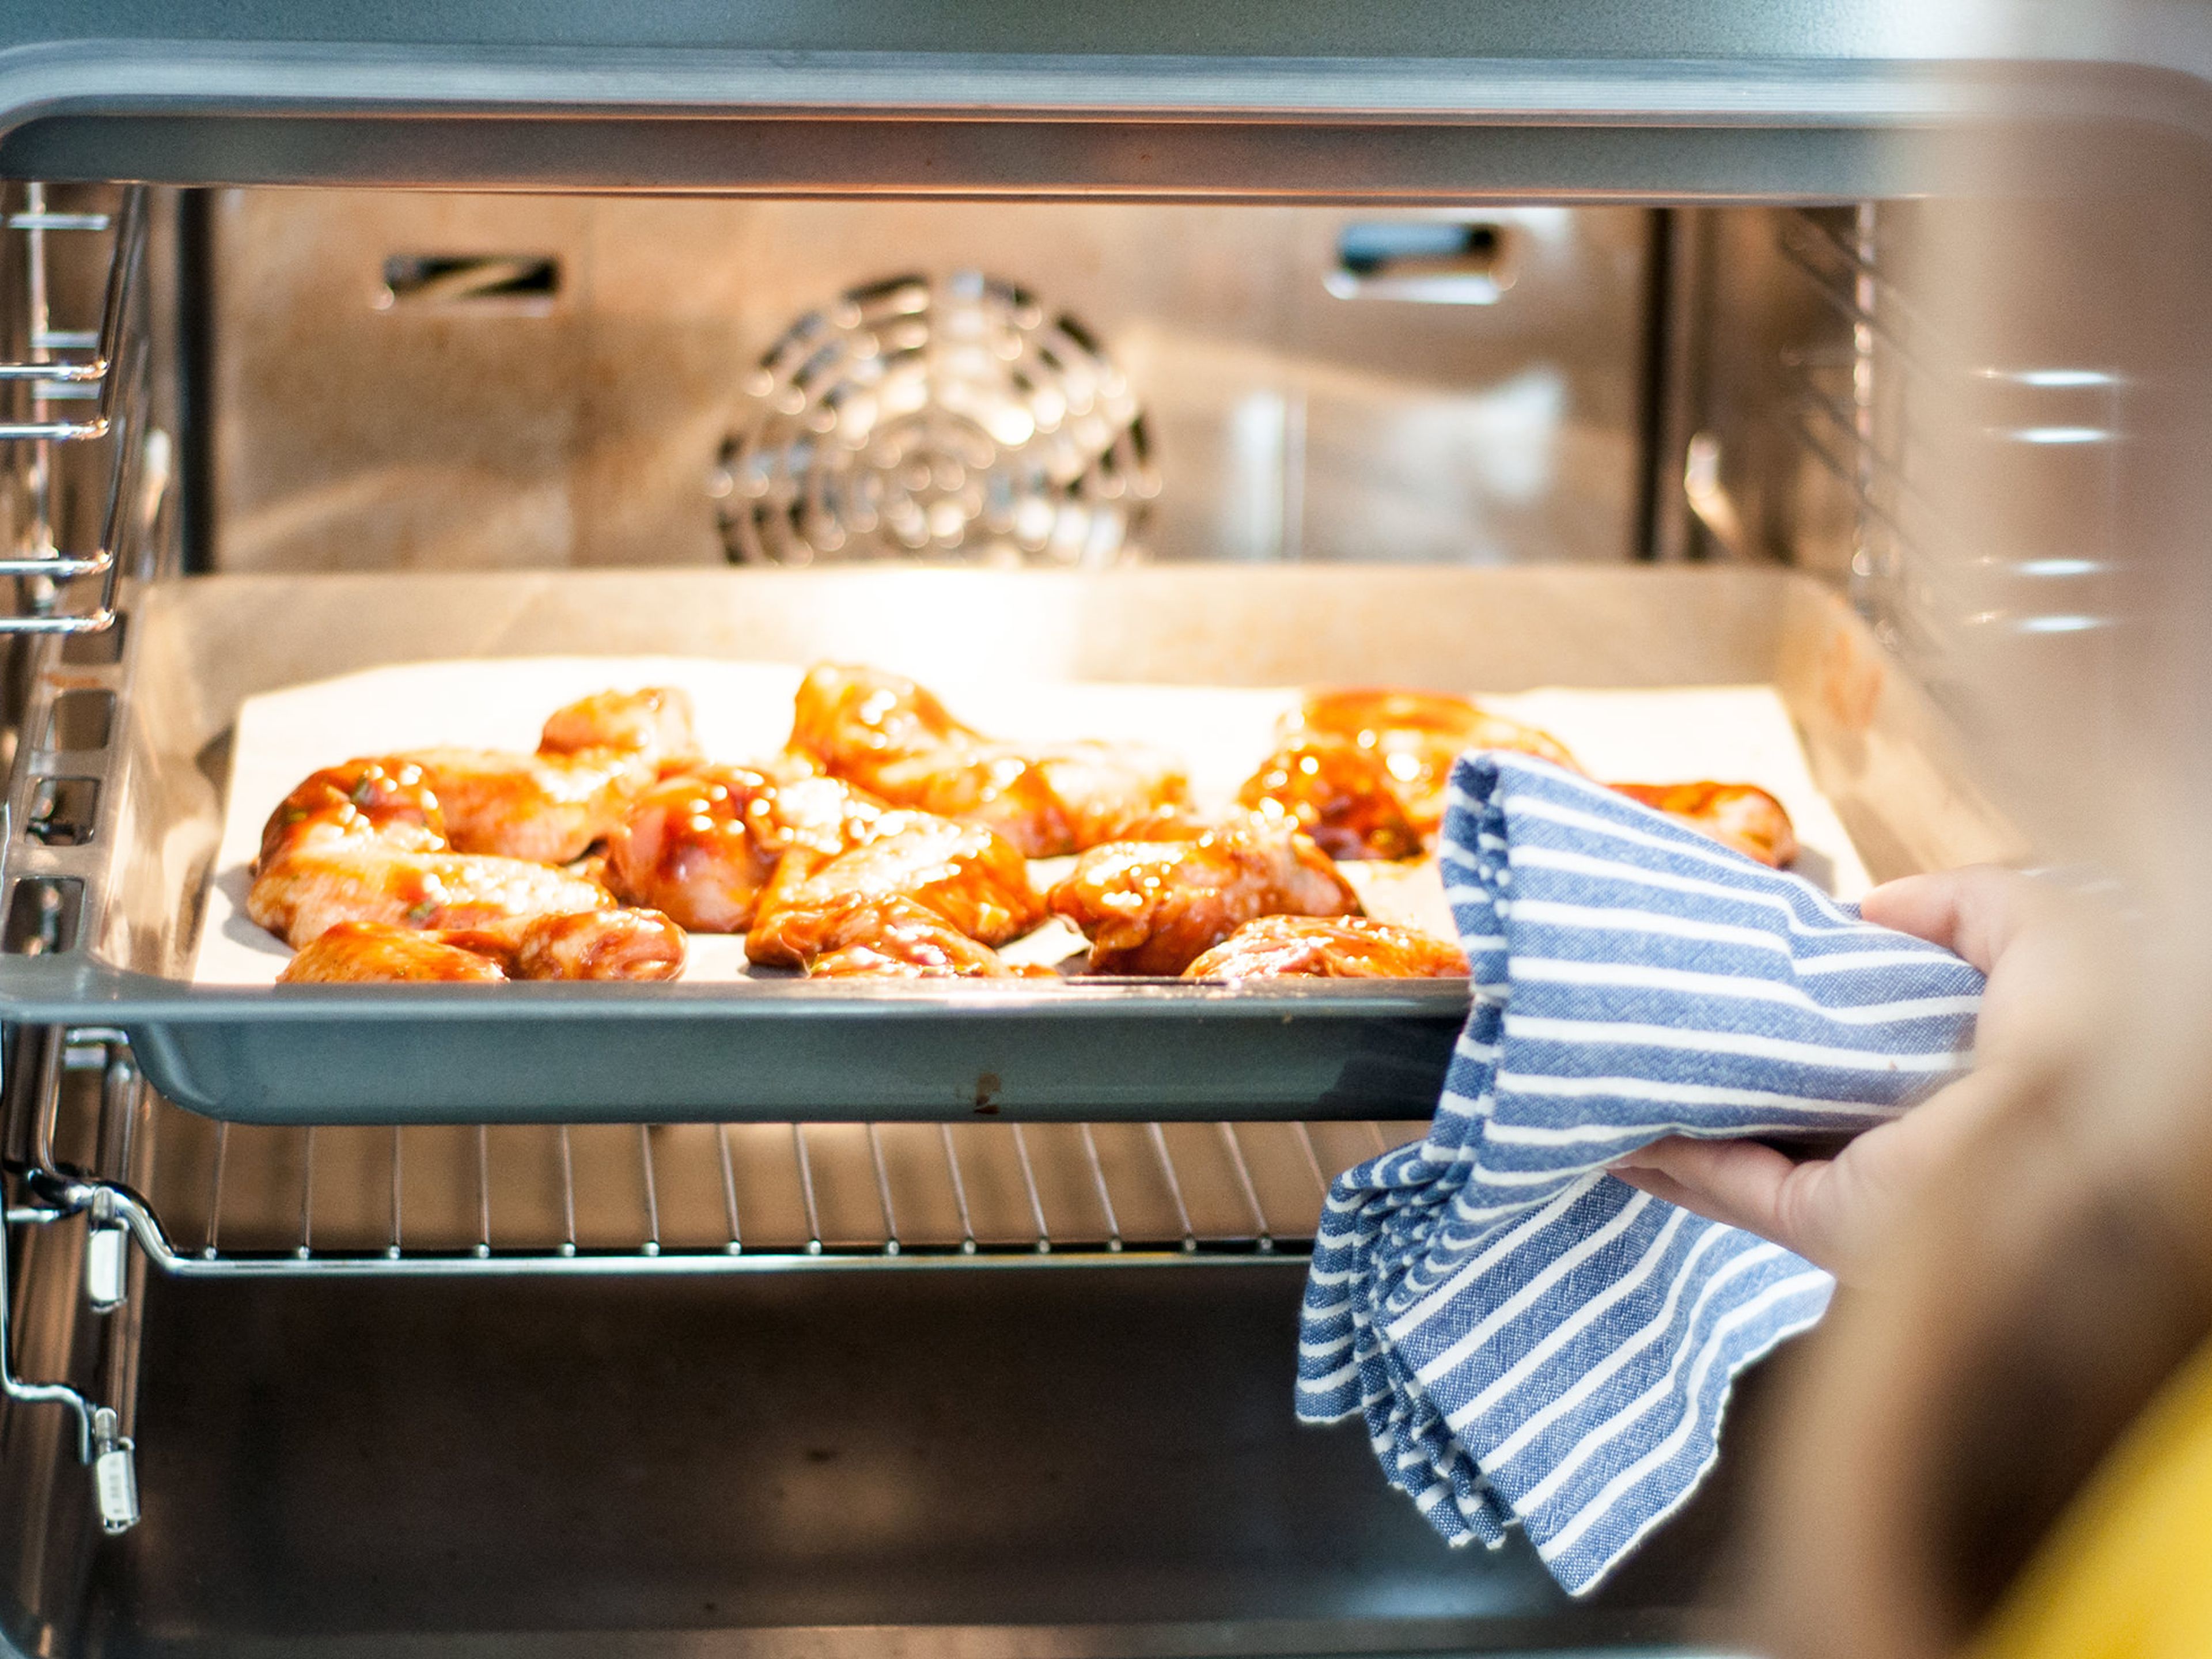 Remove chicken wings from freezer bag and shake off any excess liquid. Arrange chicken wings on a lined baking tray and bake for approx. 25 - 30 min. at 180°C/350°F until golden brown. Flip wings halfway through baking time.